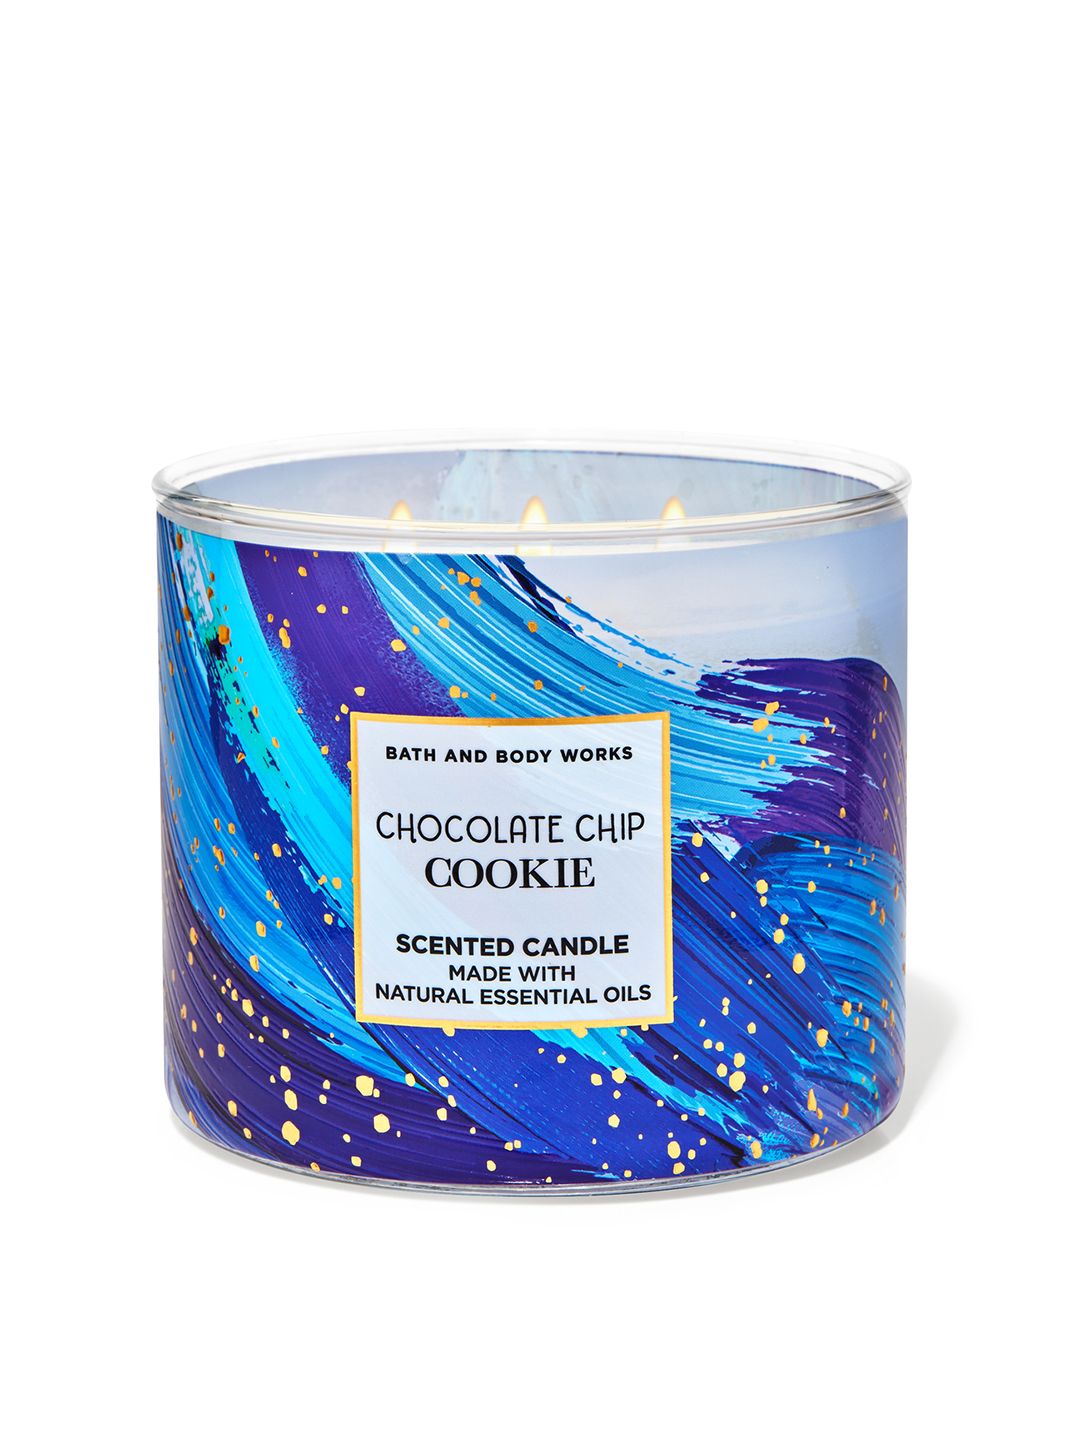 Bath & Body Works Chocolate Chip Cookie 3-Wick Scented Candle with Essential Oils - 411g Price in India